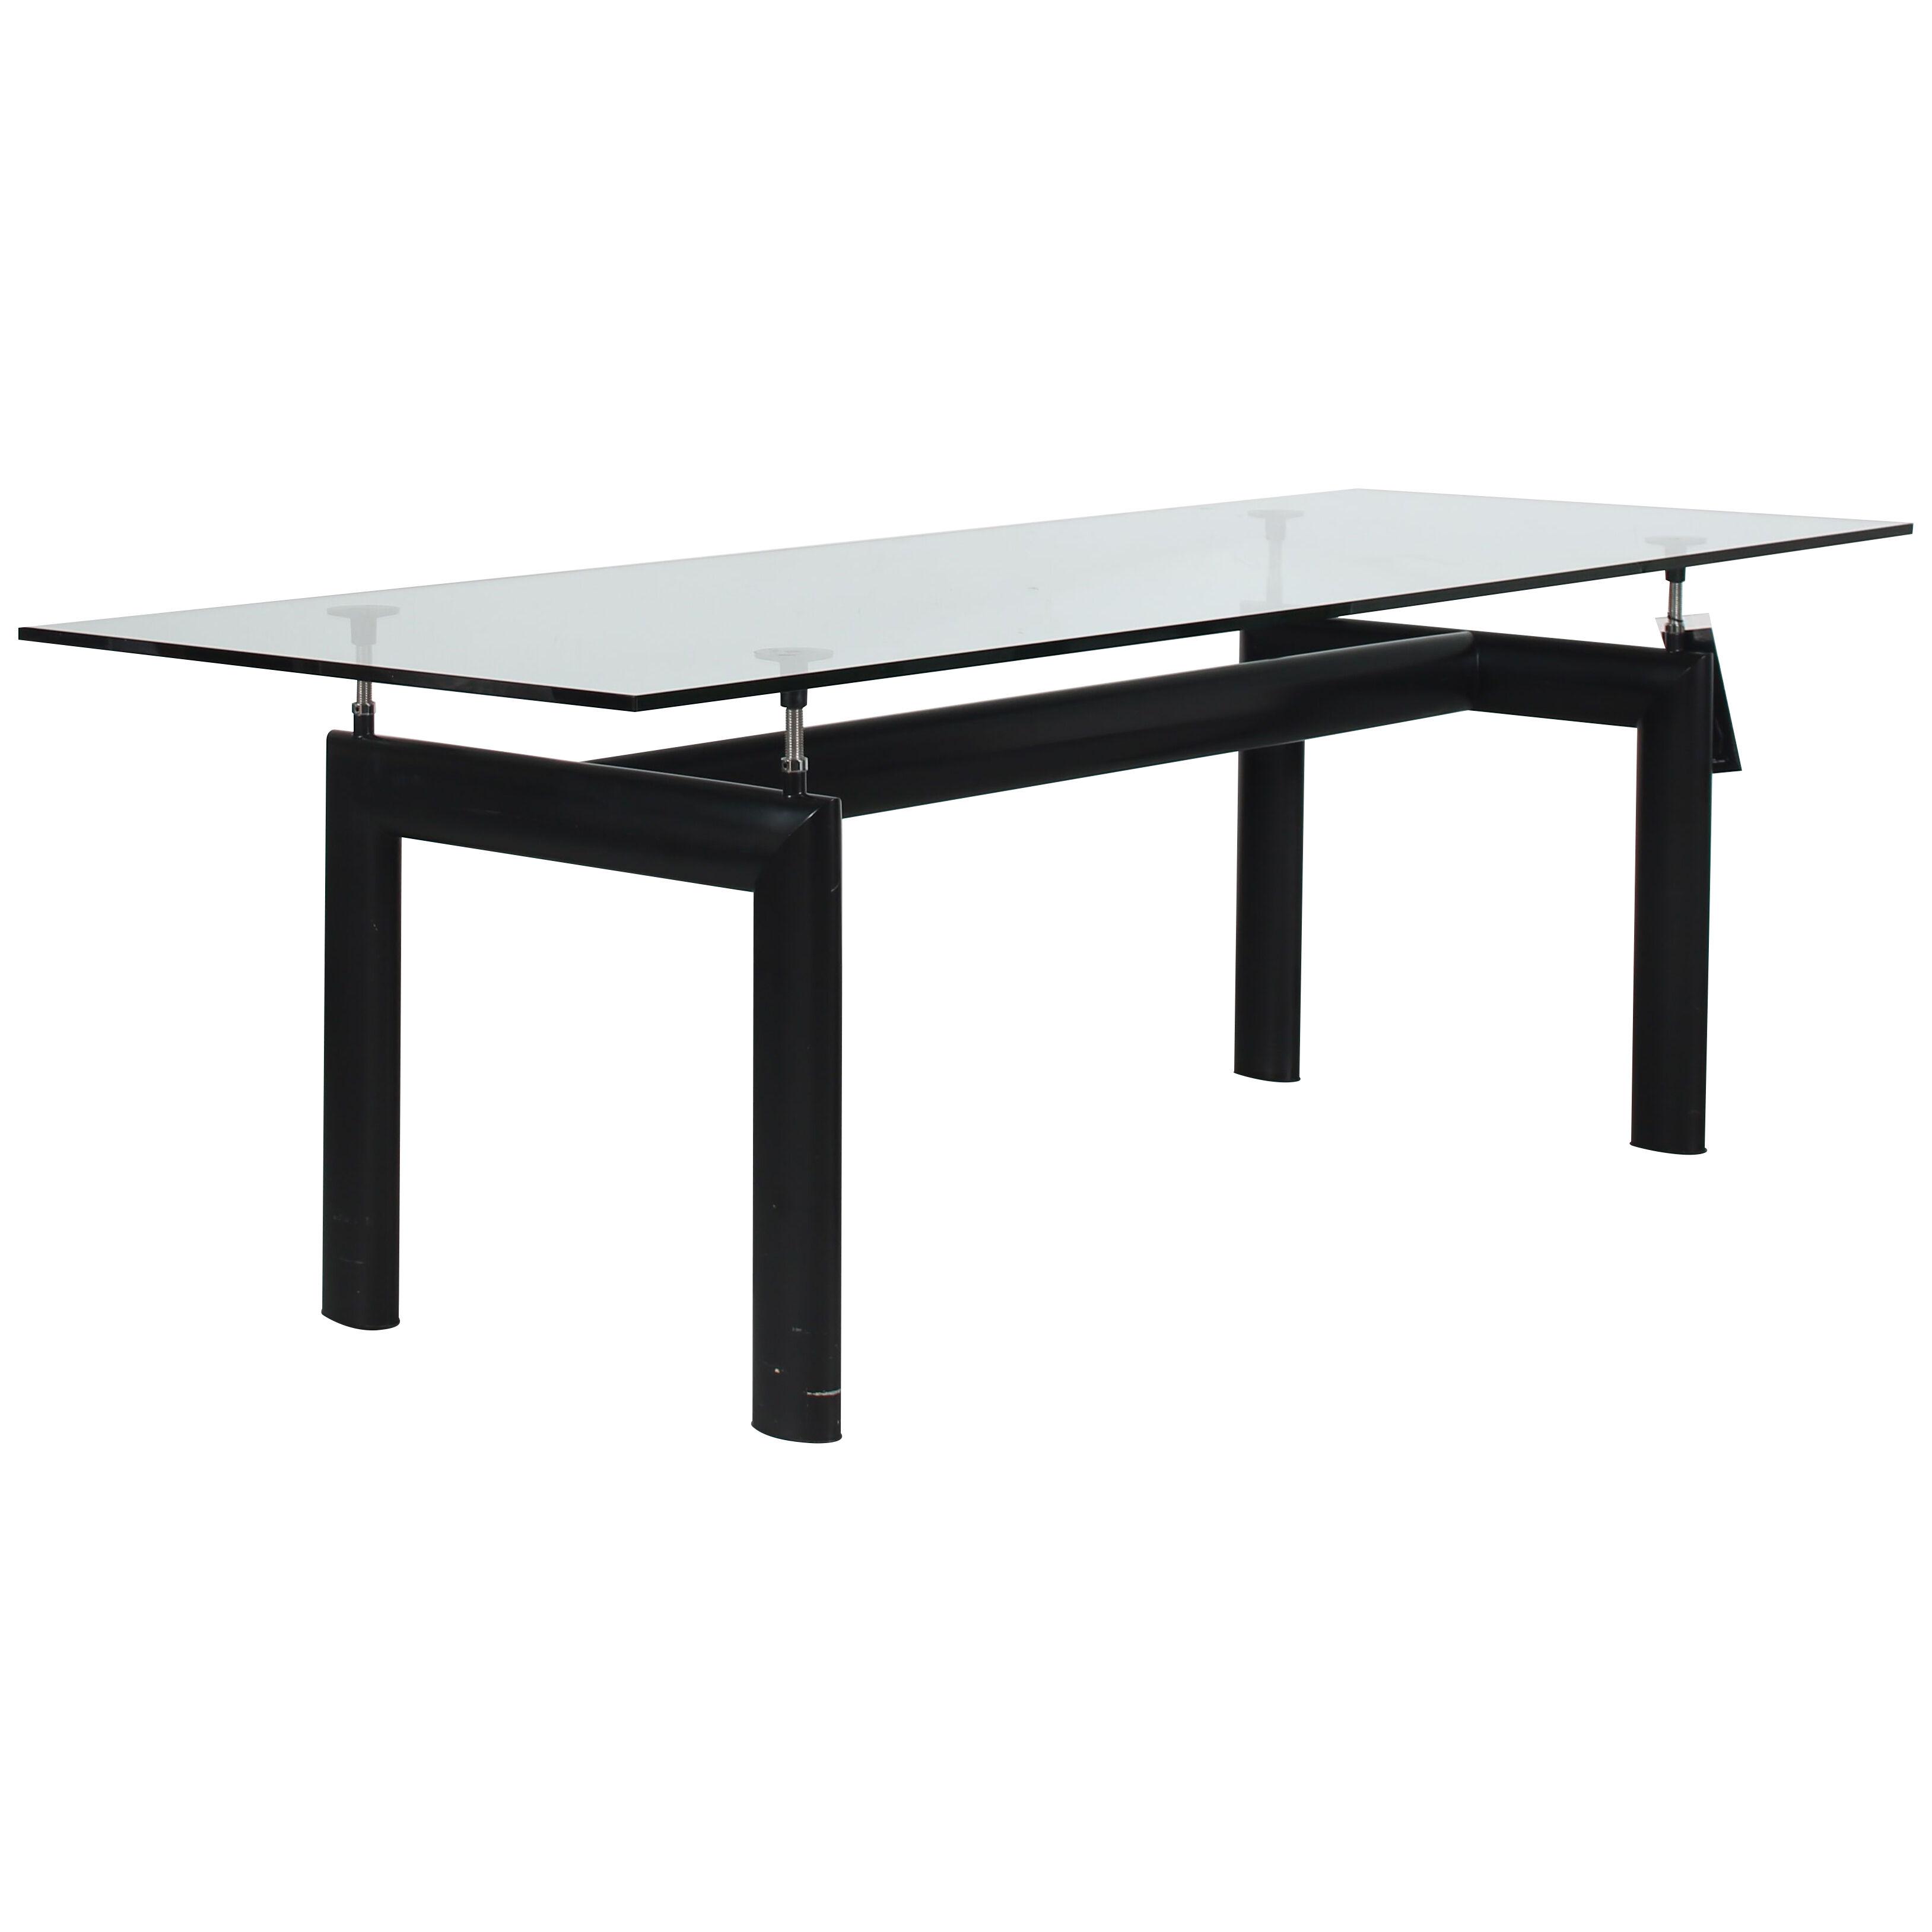 1980s “LC6” Dining table by Le Corbusier for Casina, Italy